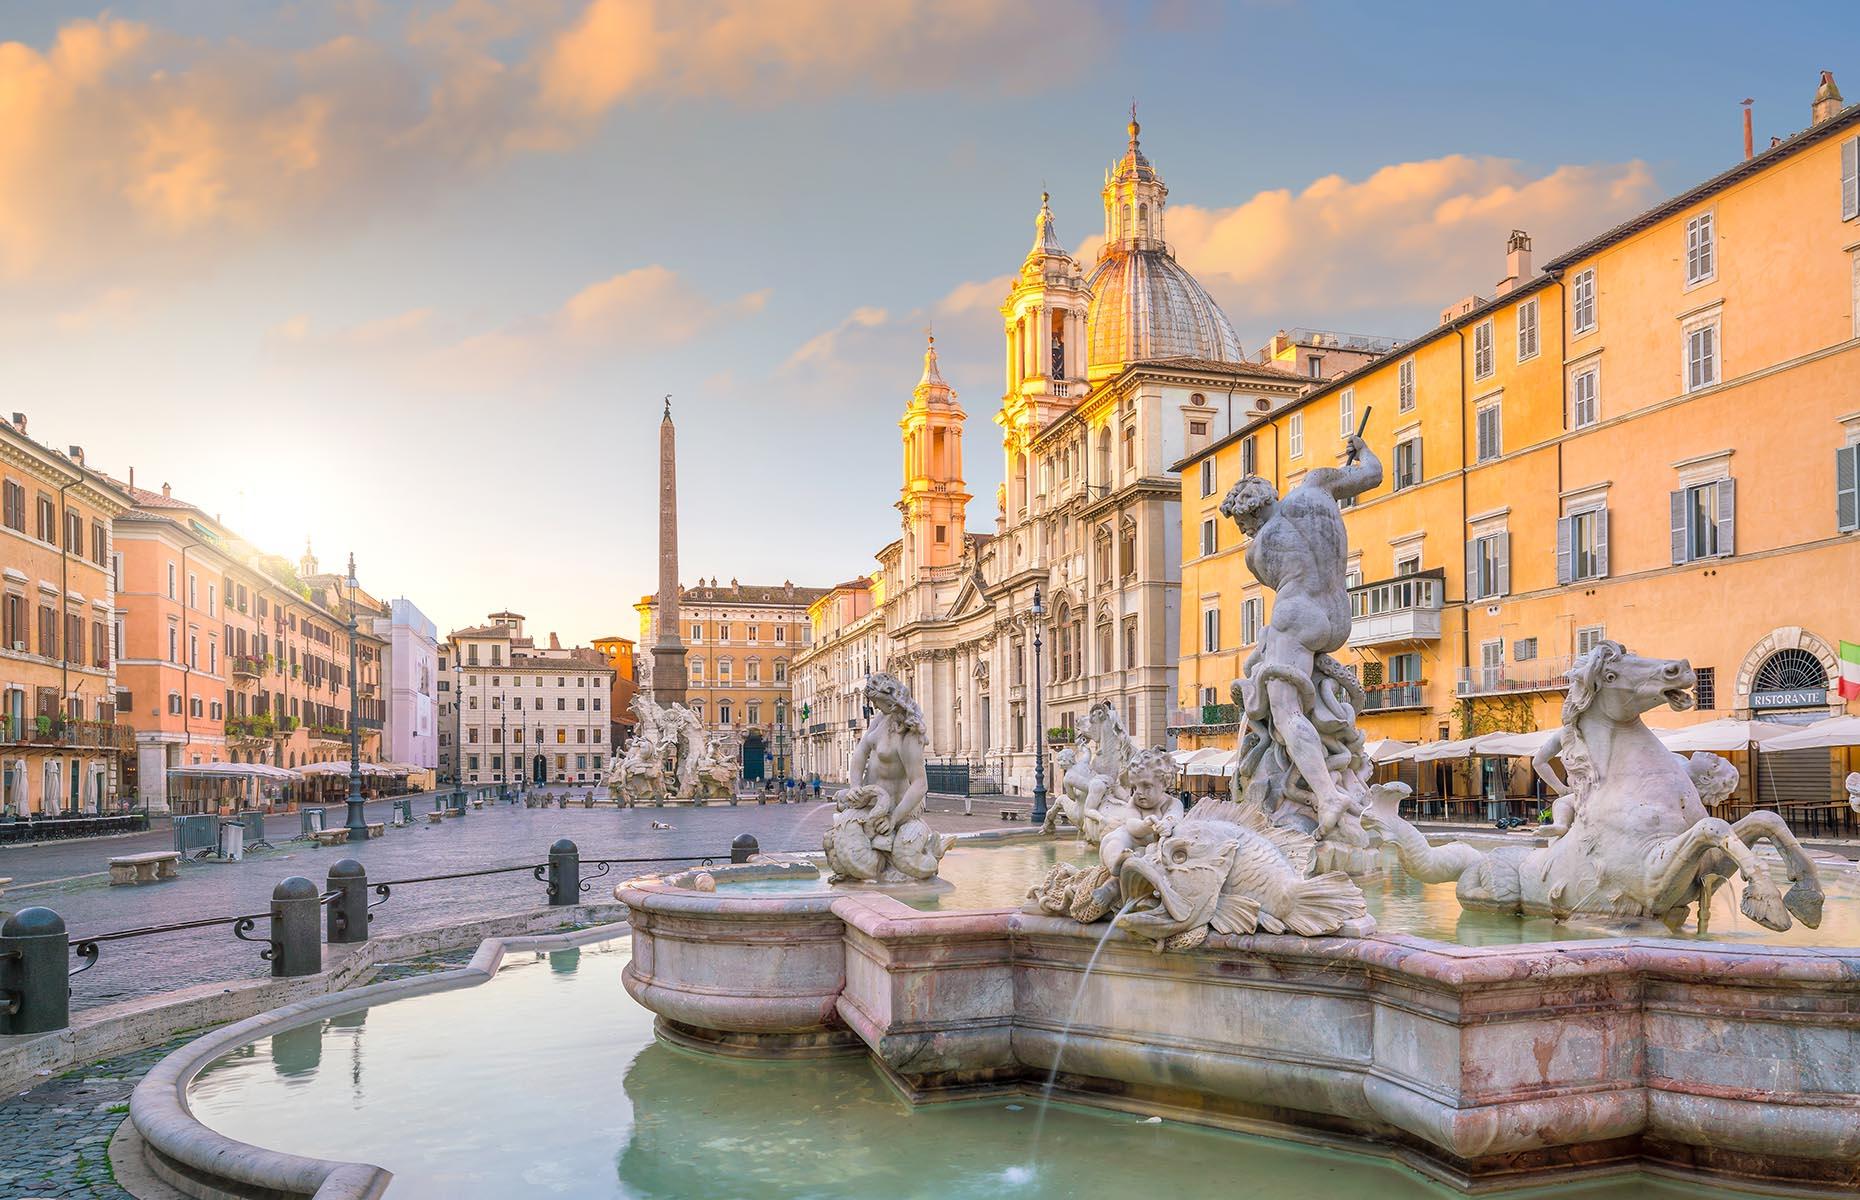 <p>Bursting with ancient monuments and picturesque piazzas, <a href="http://www.loveexploring.com/guides/64536/explore-rome-what-to-do-where-to-eat-and-sleep">Rome</a>’s historic core must be one of the world’s most beautiful. The Vatican Museums, the Colosseum, the Pantheon, Trevi Fountain and Roman Forum are among the most sought-after sights. There's also lots of charm in sipping a Campari in one of the city's squares, like Piazza Navona (pictured).</p>